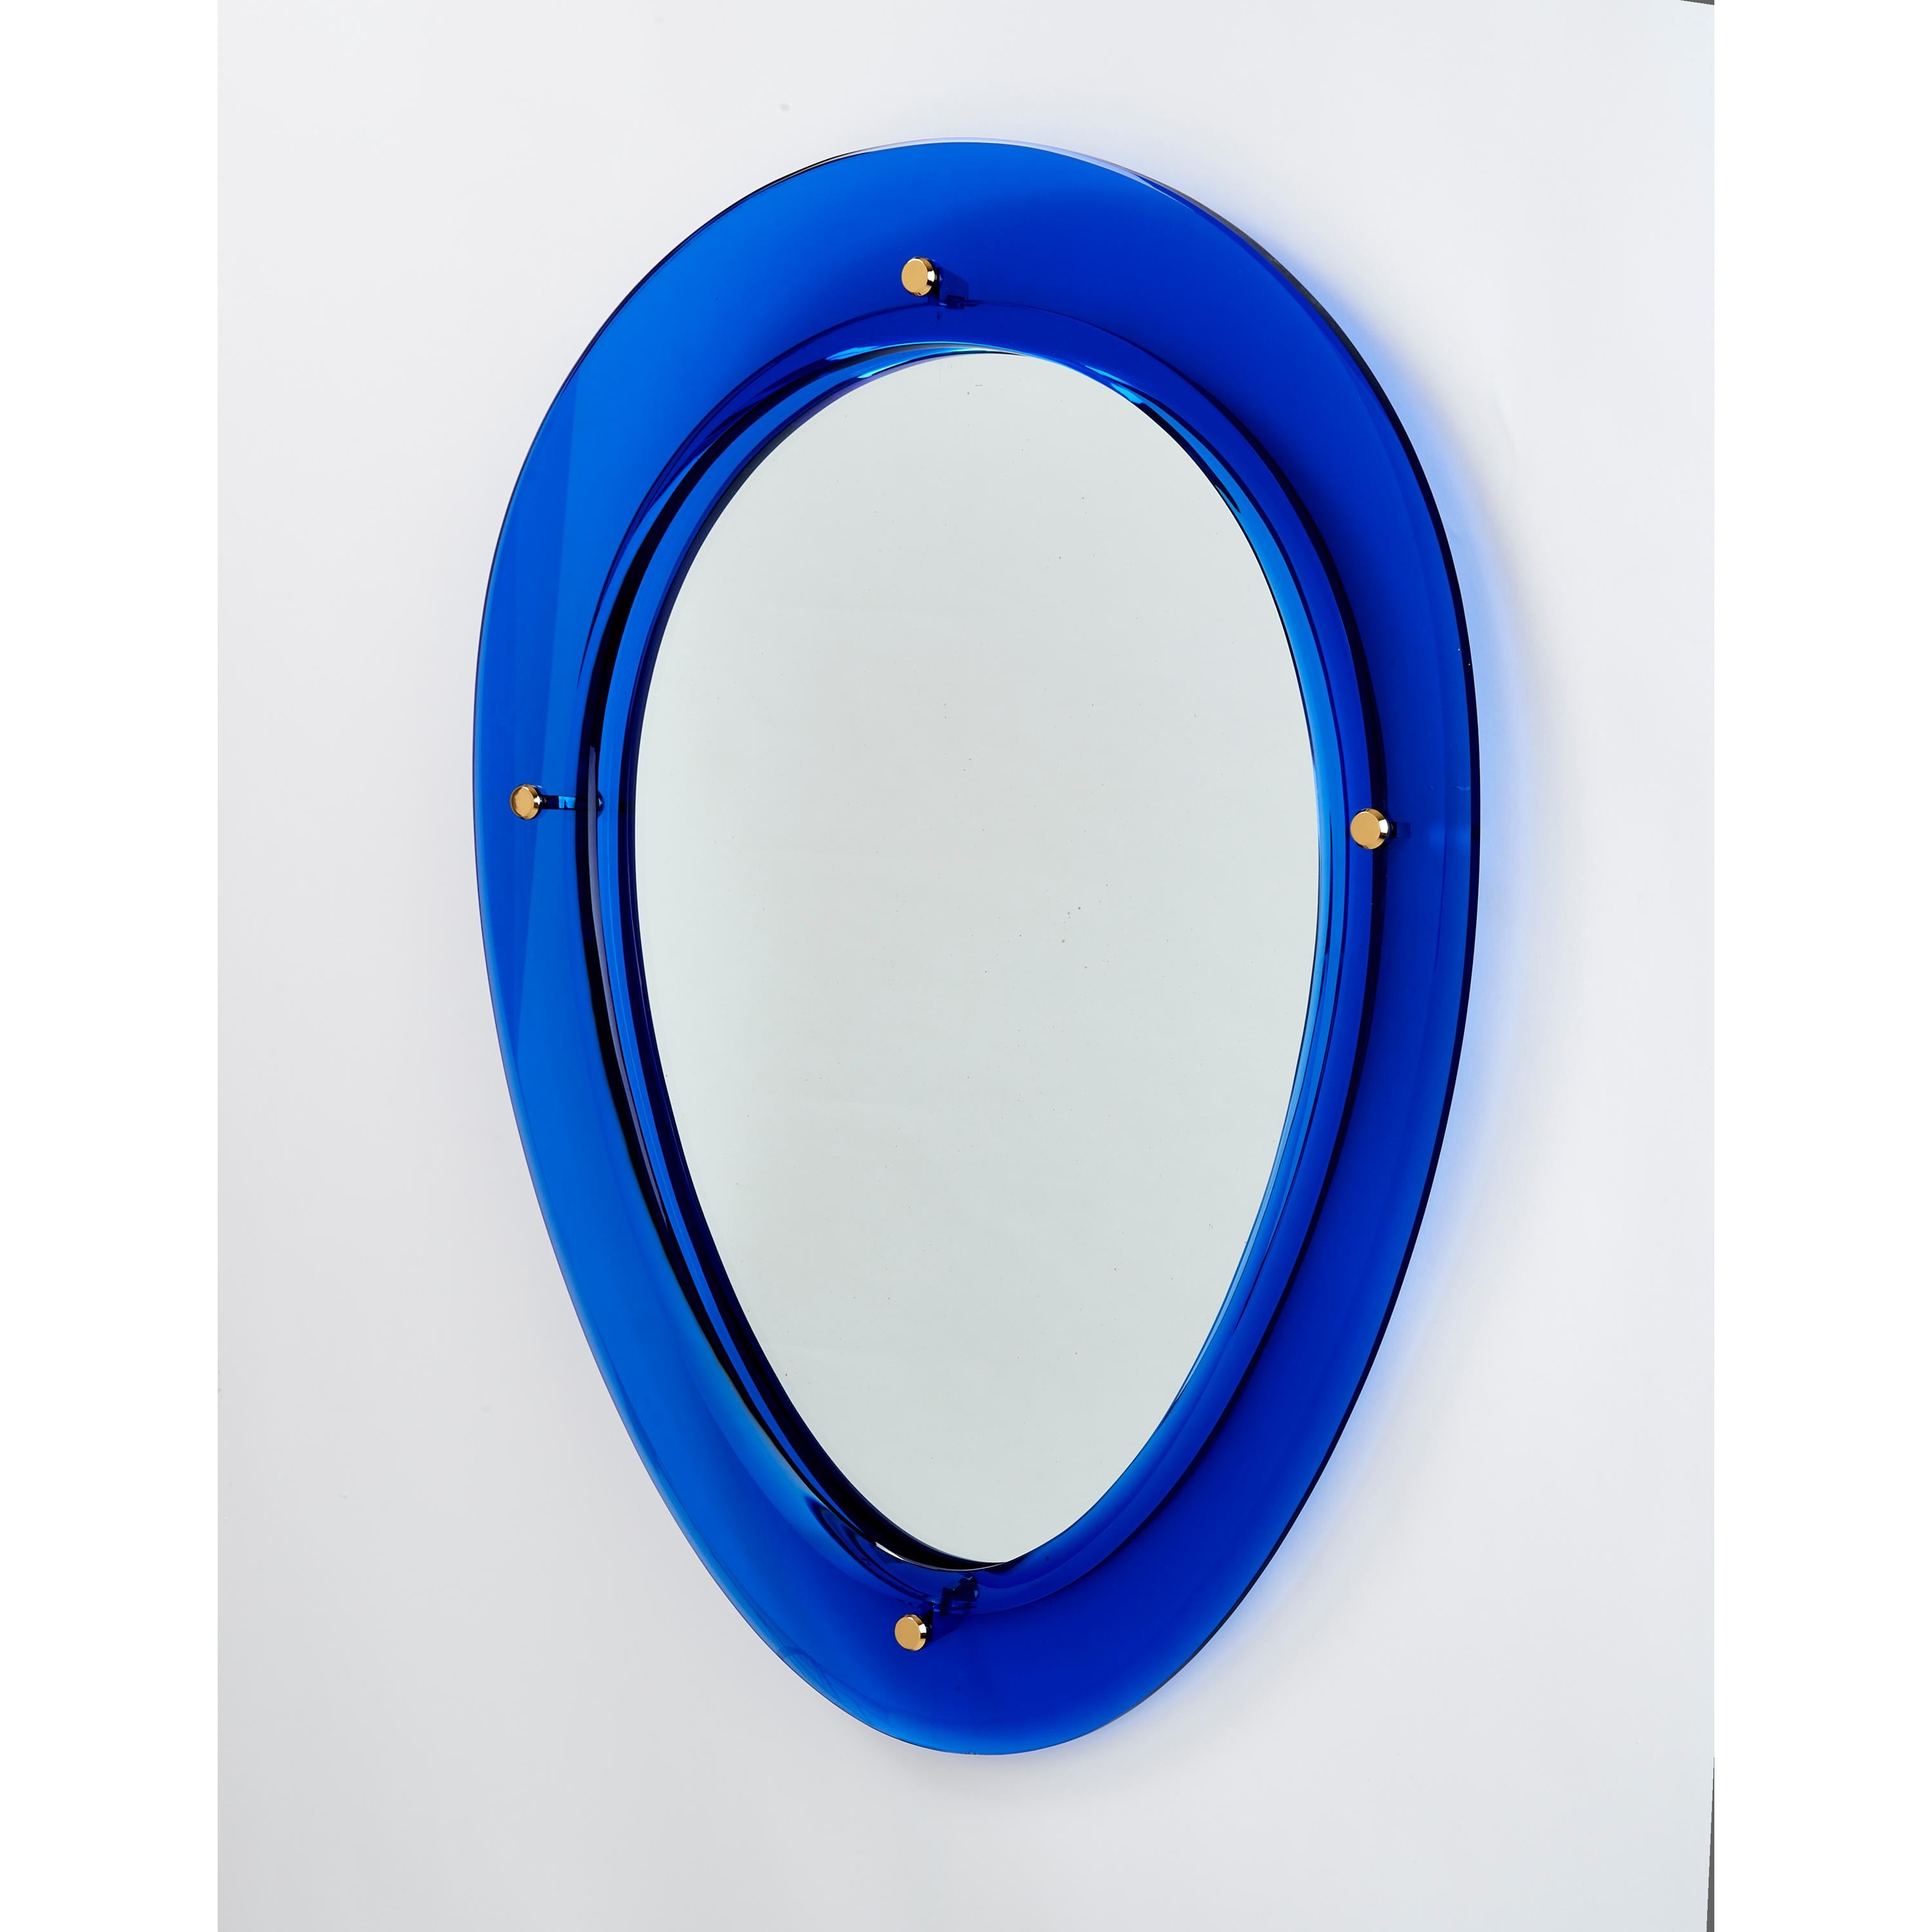 Pair of Blue Oval Shaped Glass Mirrors, Italy, 1960s For Sale 2